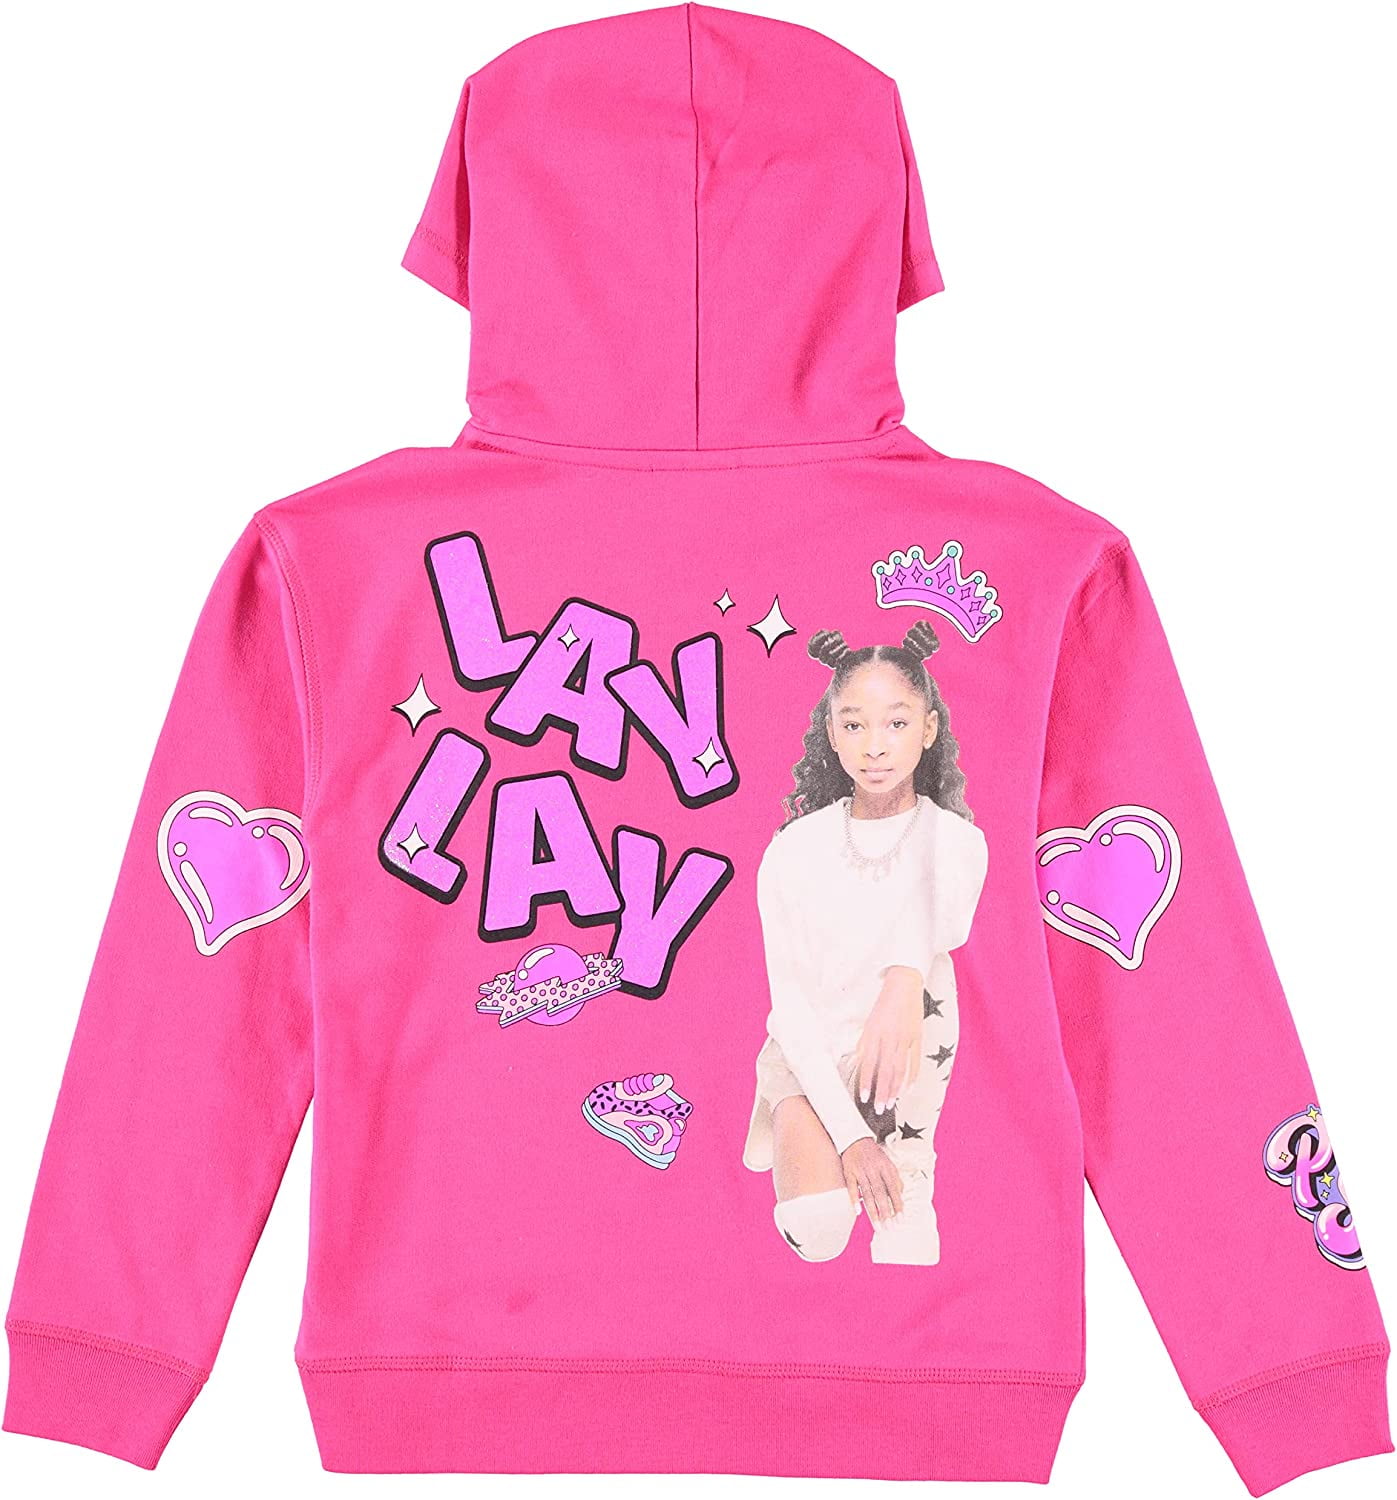 dråbe Fremskynde indre Nickelodeon That Girl Lay Lay Girls Free Style Hoodie -That Girl LAYLAY  Pullover Hoodie- Sizes 4-16 14-16 Hot Pink - Walmart.com